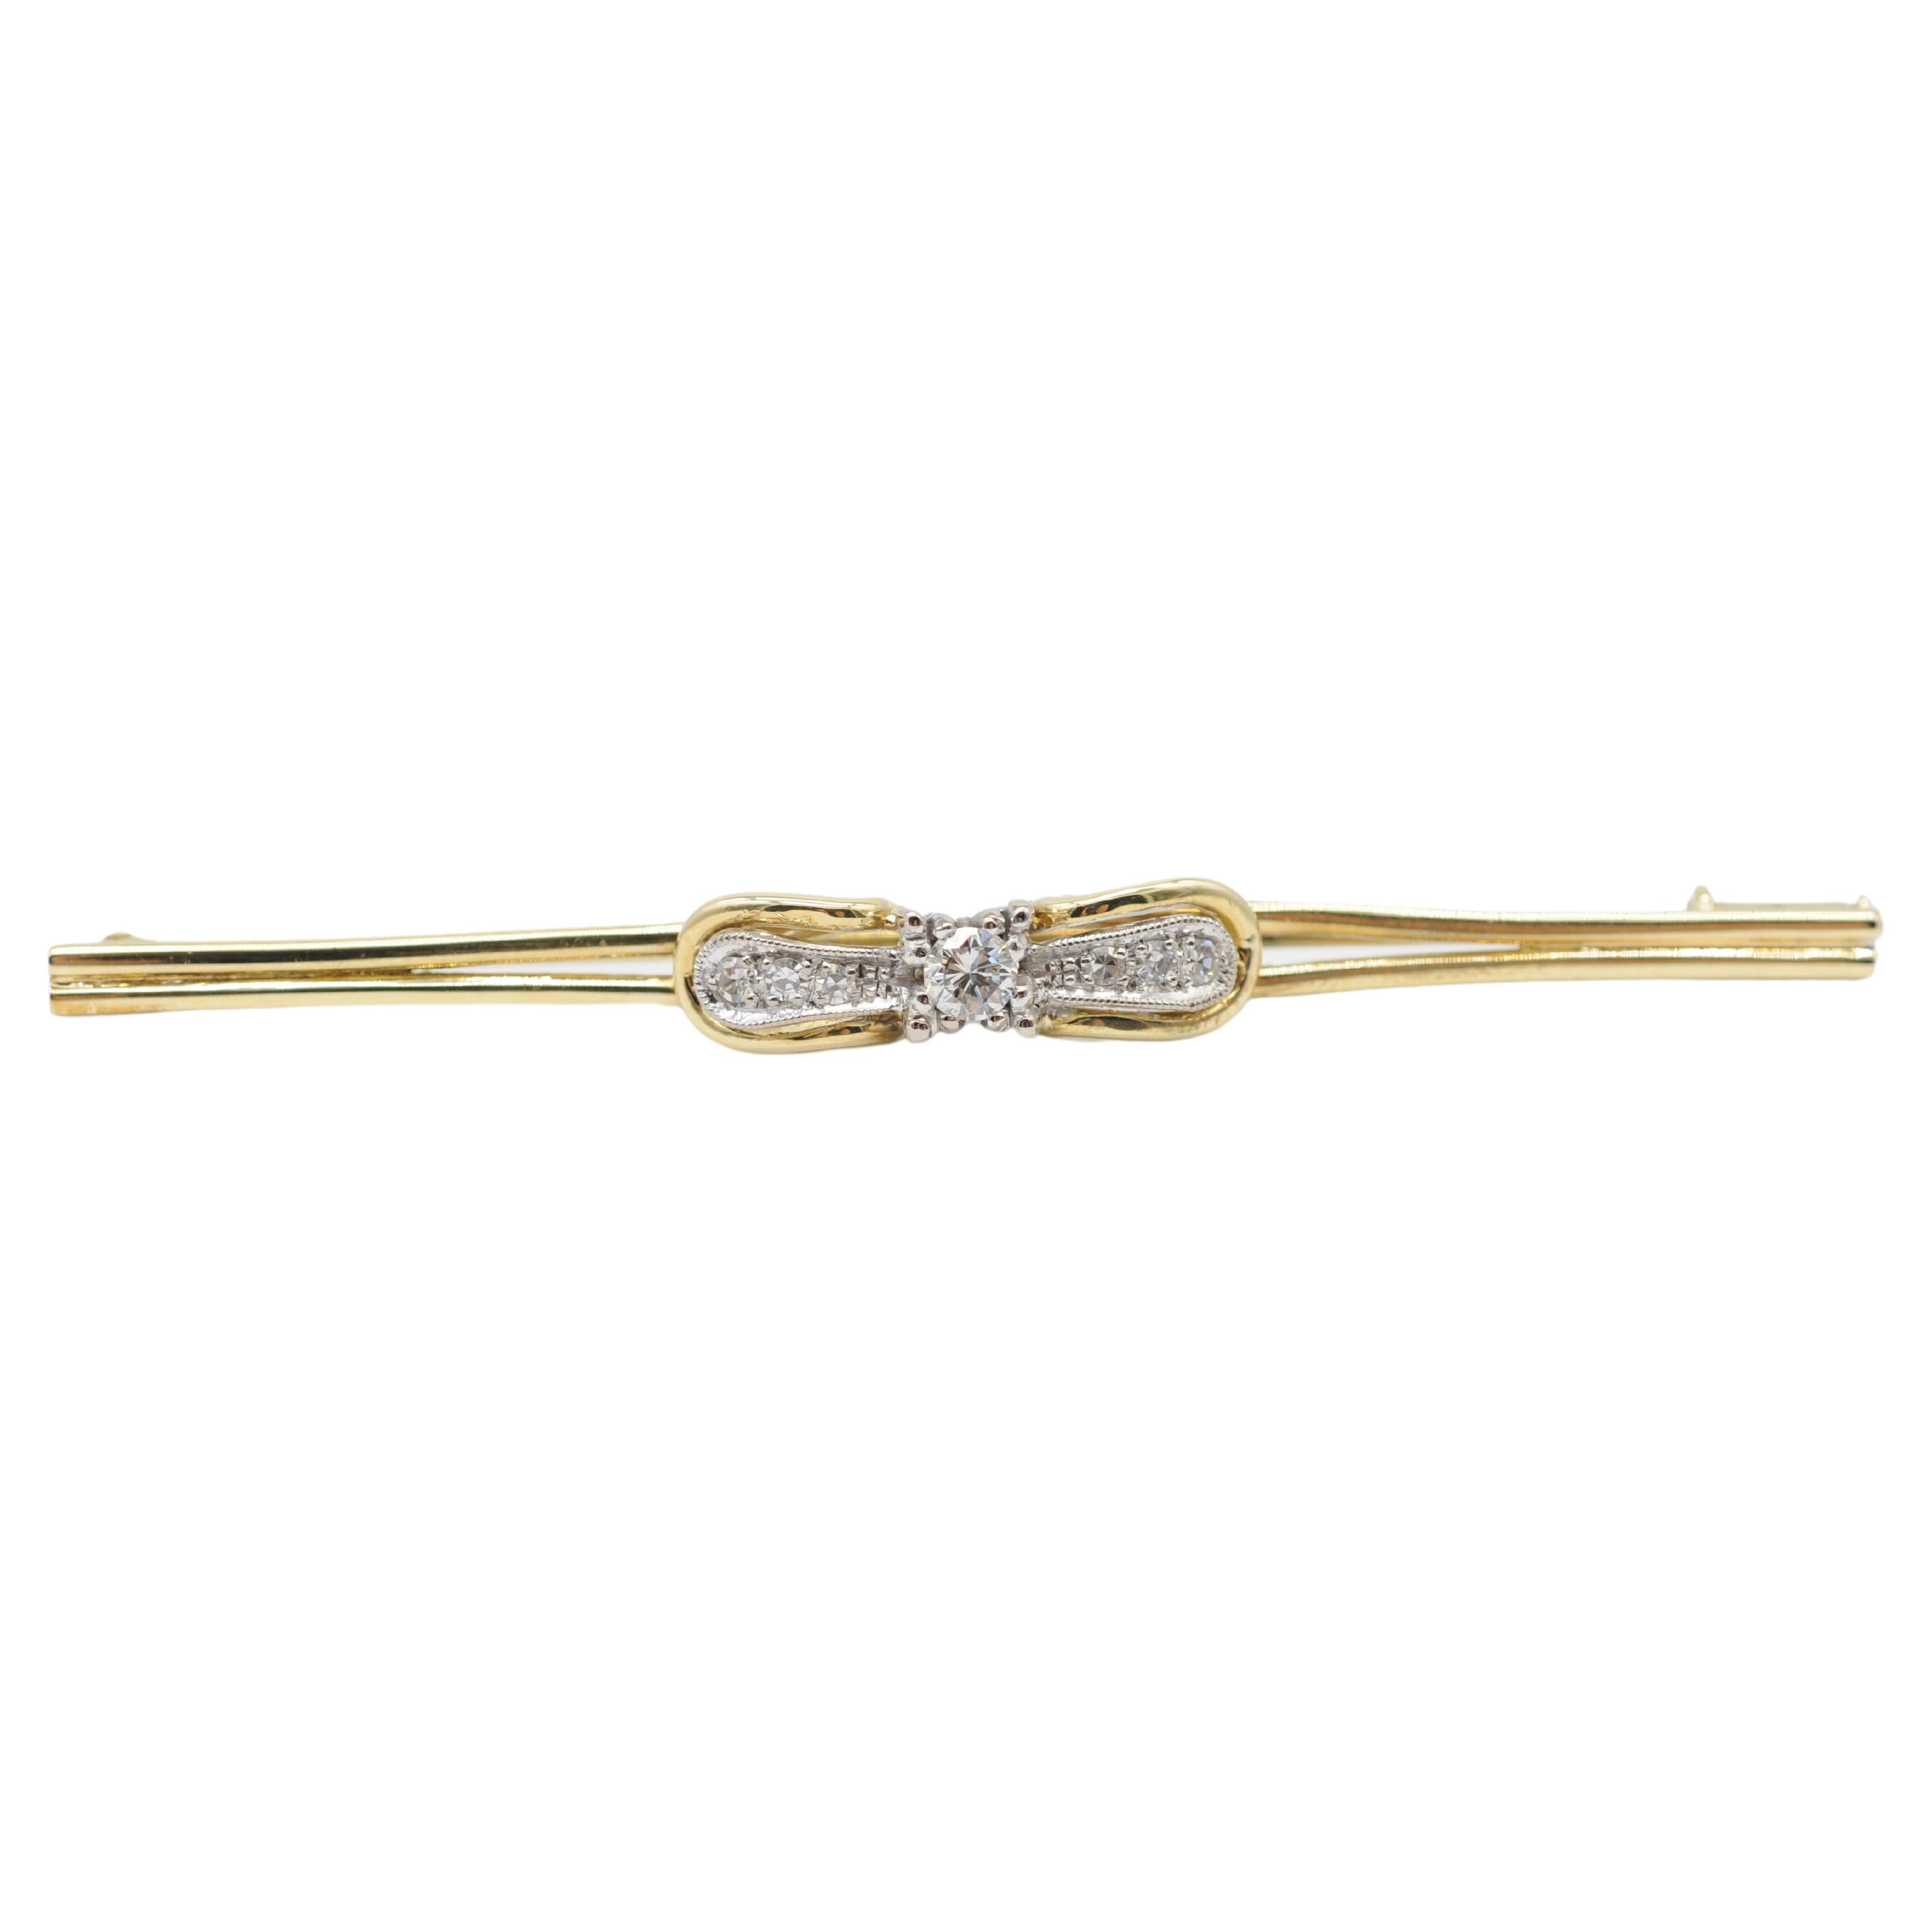 Art Deco brooch with diamonds and gold For Sale 1